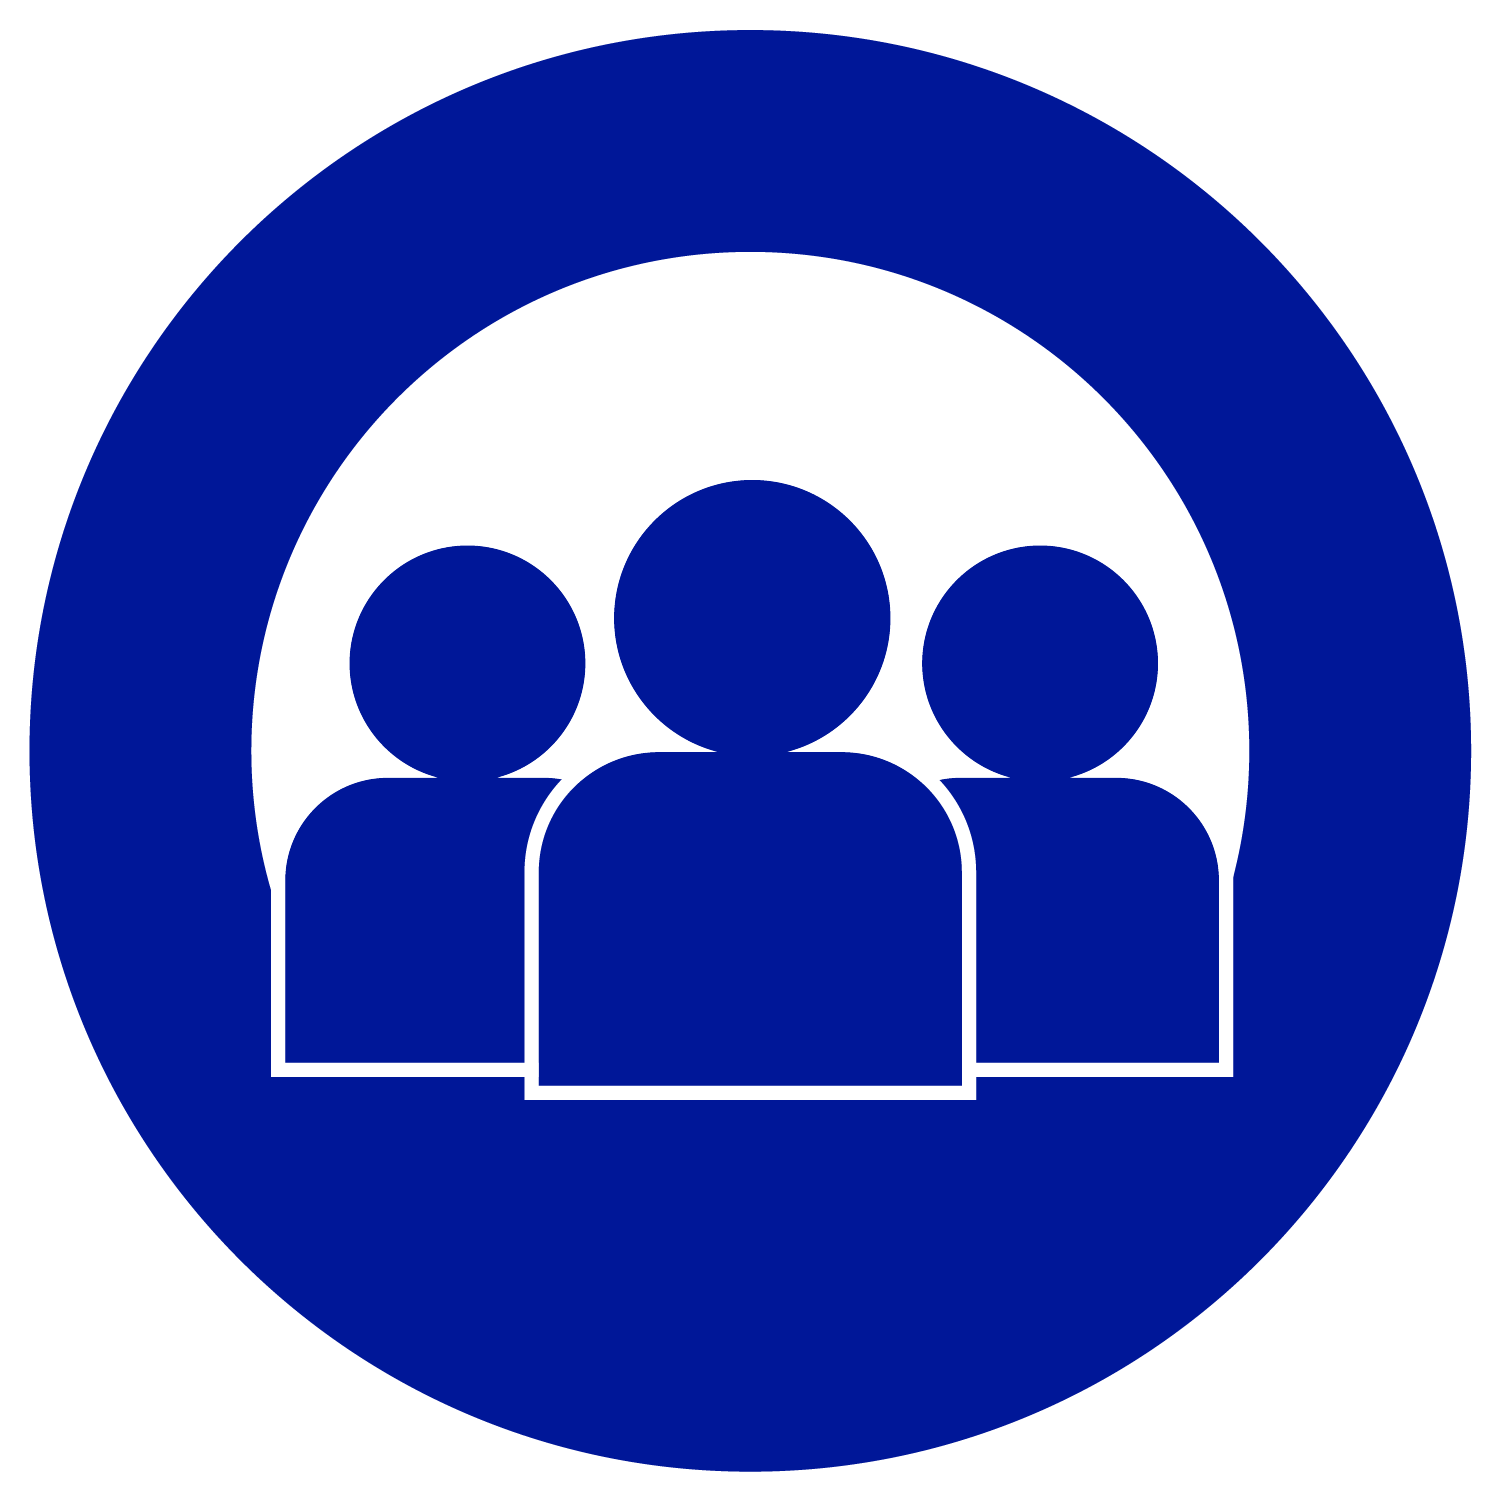 circular blue icon with three figures, representing a team of people